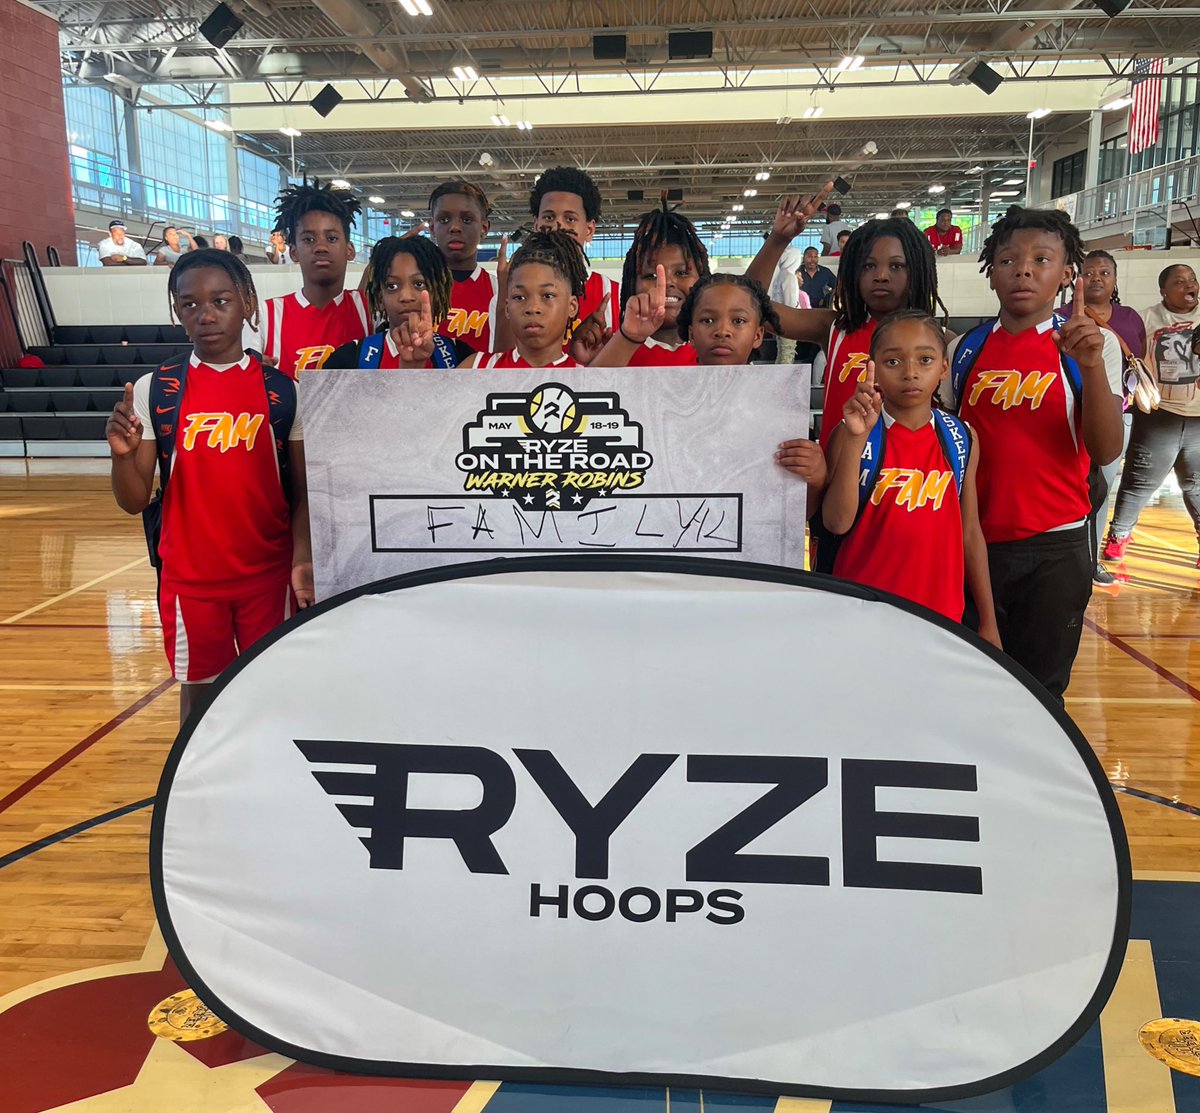 RYZE on the Road Warner Robins II 10/11U Champions: Middle Georgia Family MGF brought the atmosphere and intensity every time out. There’s s lot of resilience and toughness with them and they showed that all weekend.